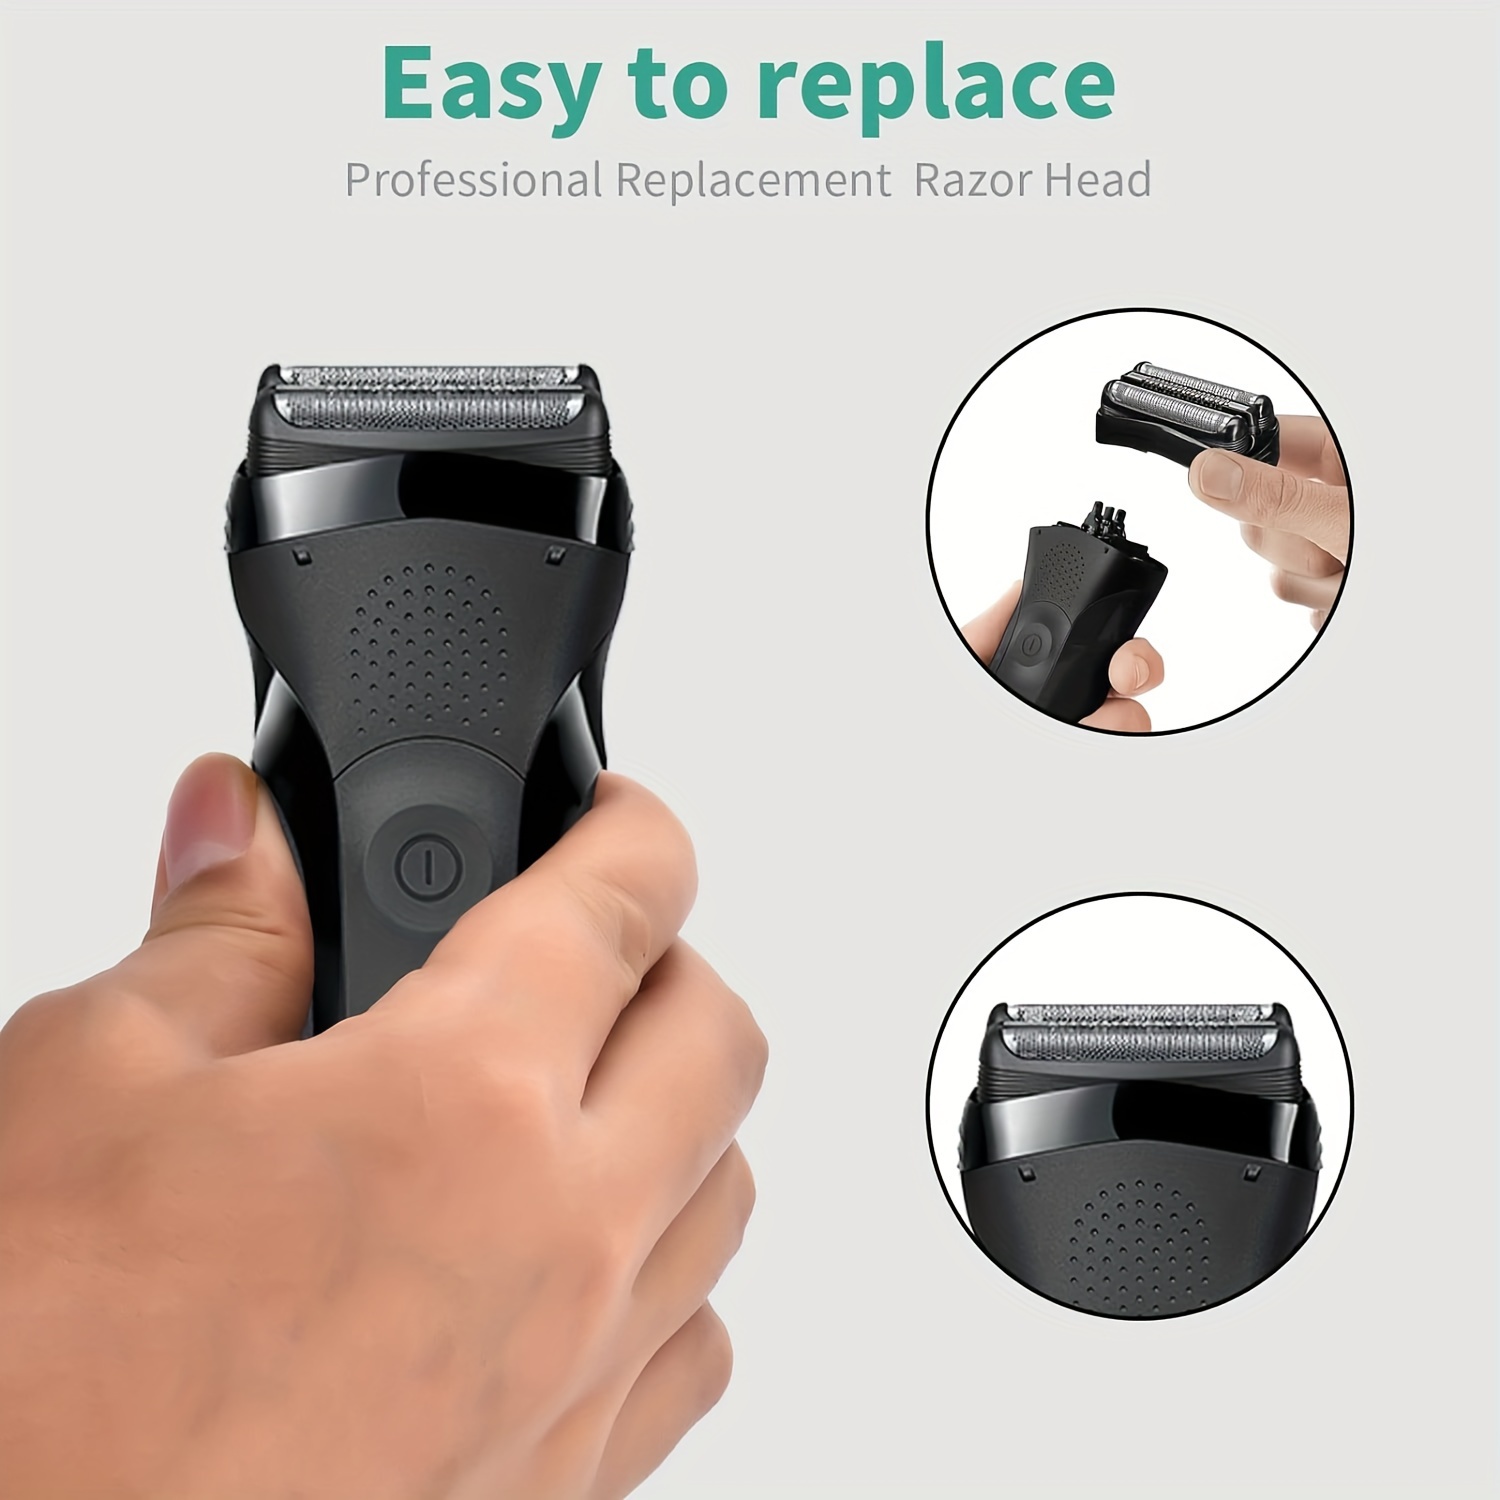 32B S3 Electric Replacement Shaver Head Accessories for Braun Series3  Shaving Razor Head, Suitable for Braun S3 3040s 3000s 3050cc 3010s 3070cc  3080s 3090s 310s 3020s 330s 370cc-4 380s-4, 3090cc Etc.